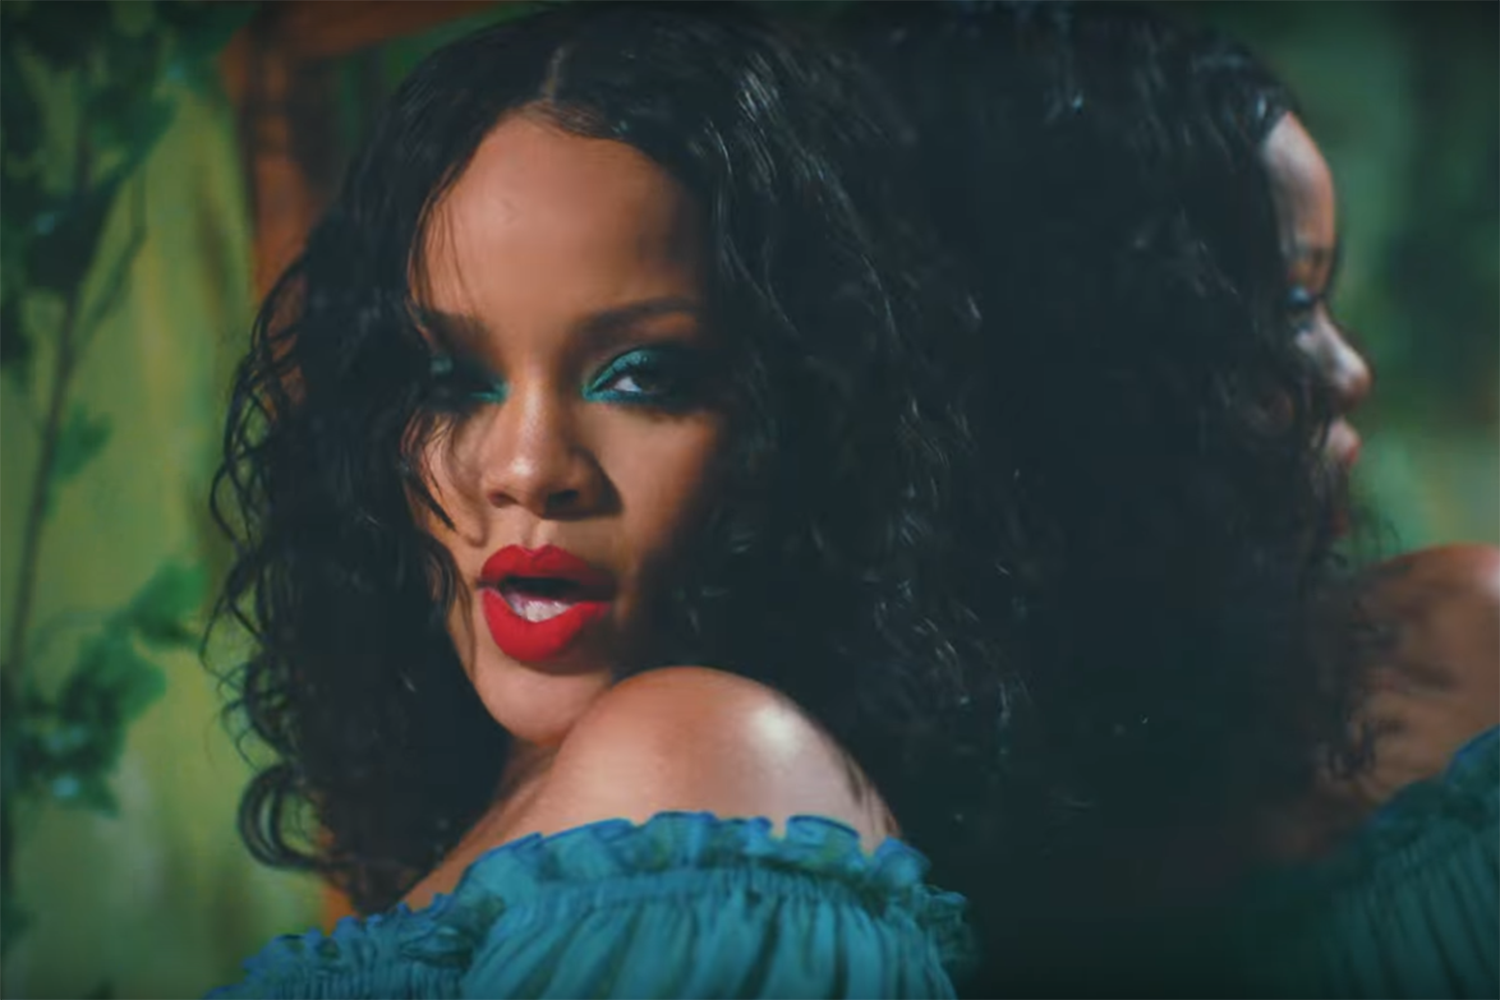 Rihanna wears an eyepatch on the set of her new music video